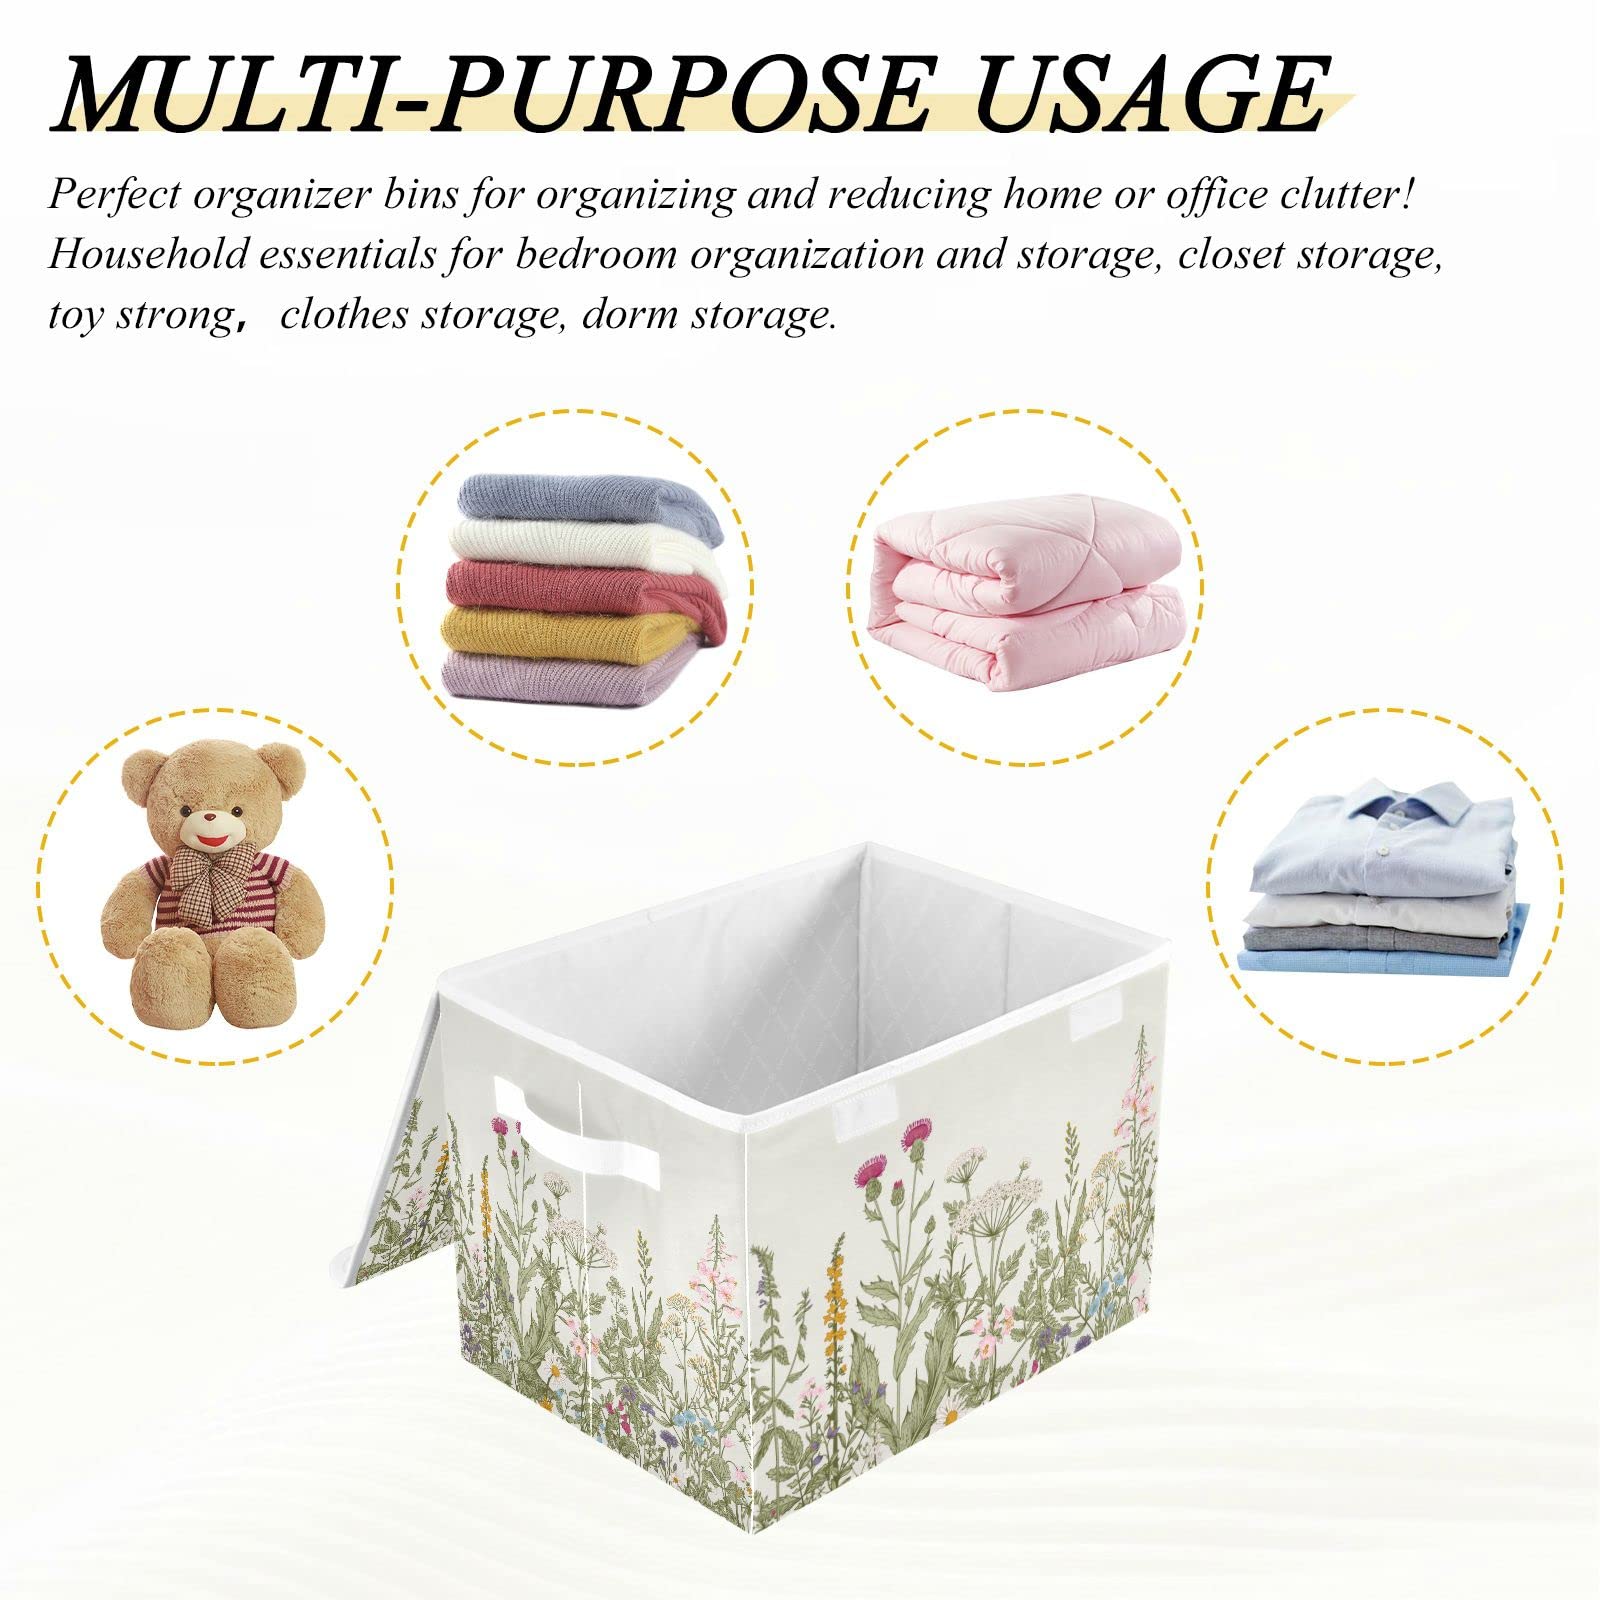 DOMIKING Wild Flowers Storage Basket Decorative Storage Bins with Lids for Toys Organizers Fabric Collapsible Rectangular Storage Boxes with Handles for Pet/Children Toys Clothes Nursery